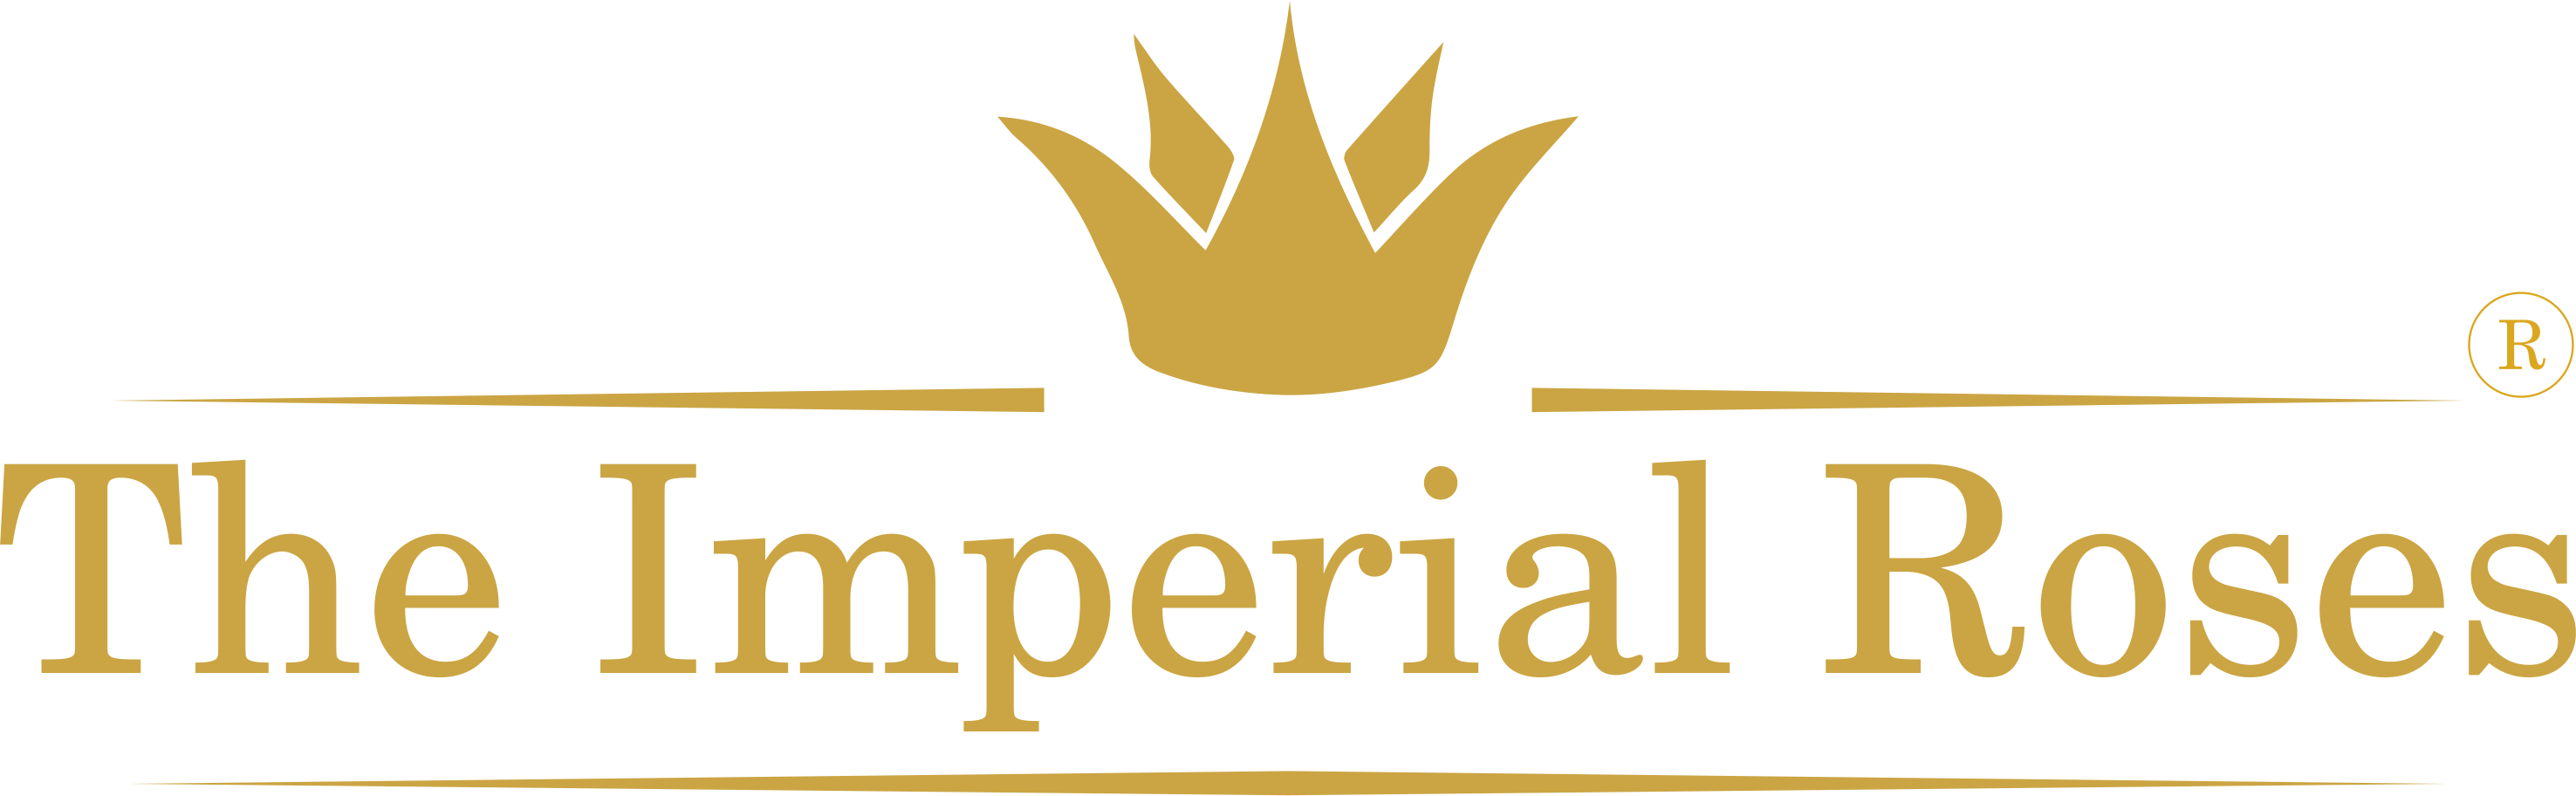 The Imperial Roses